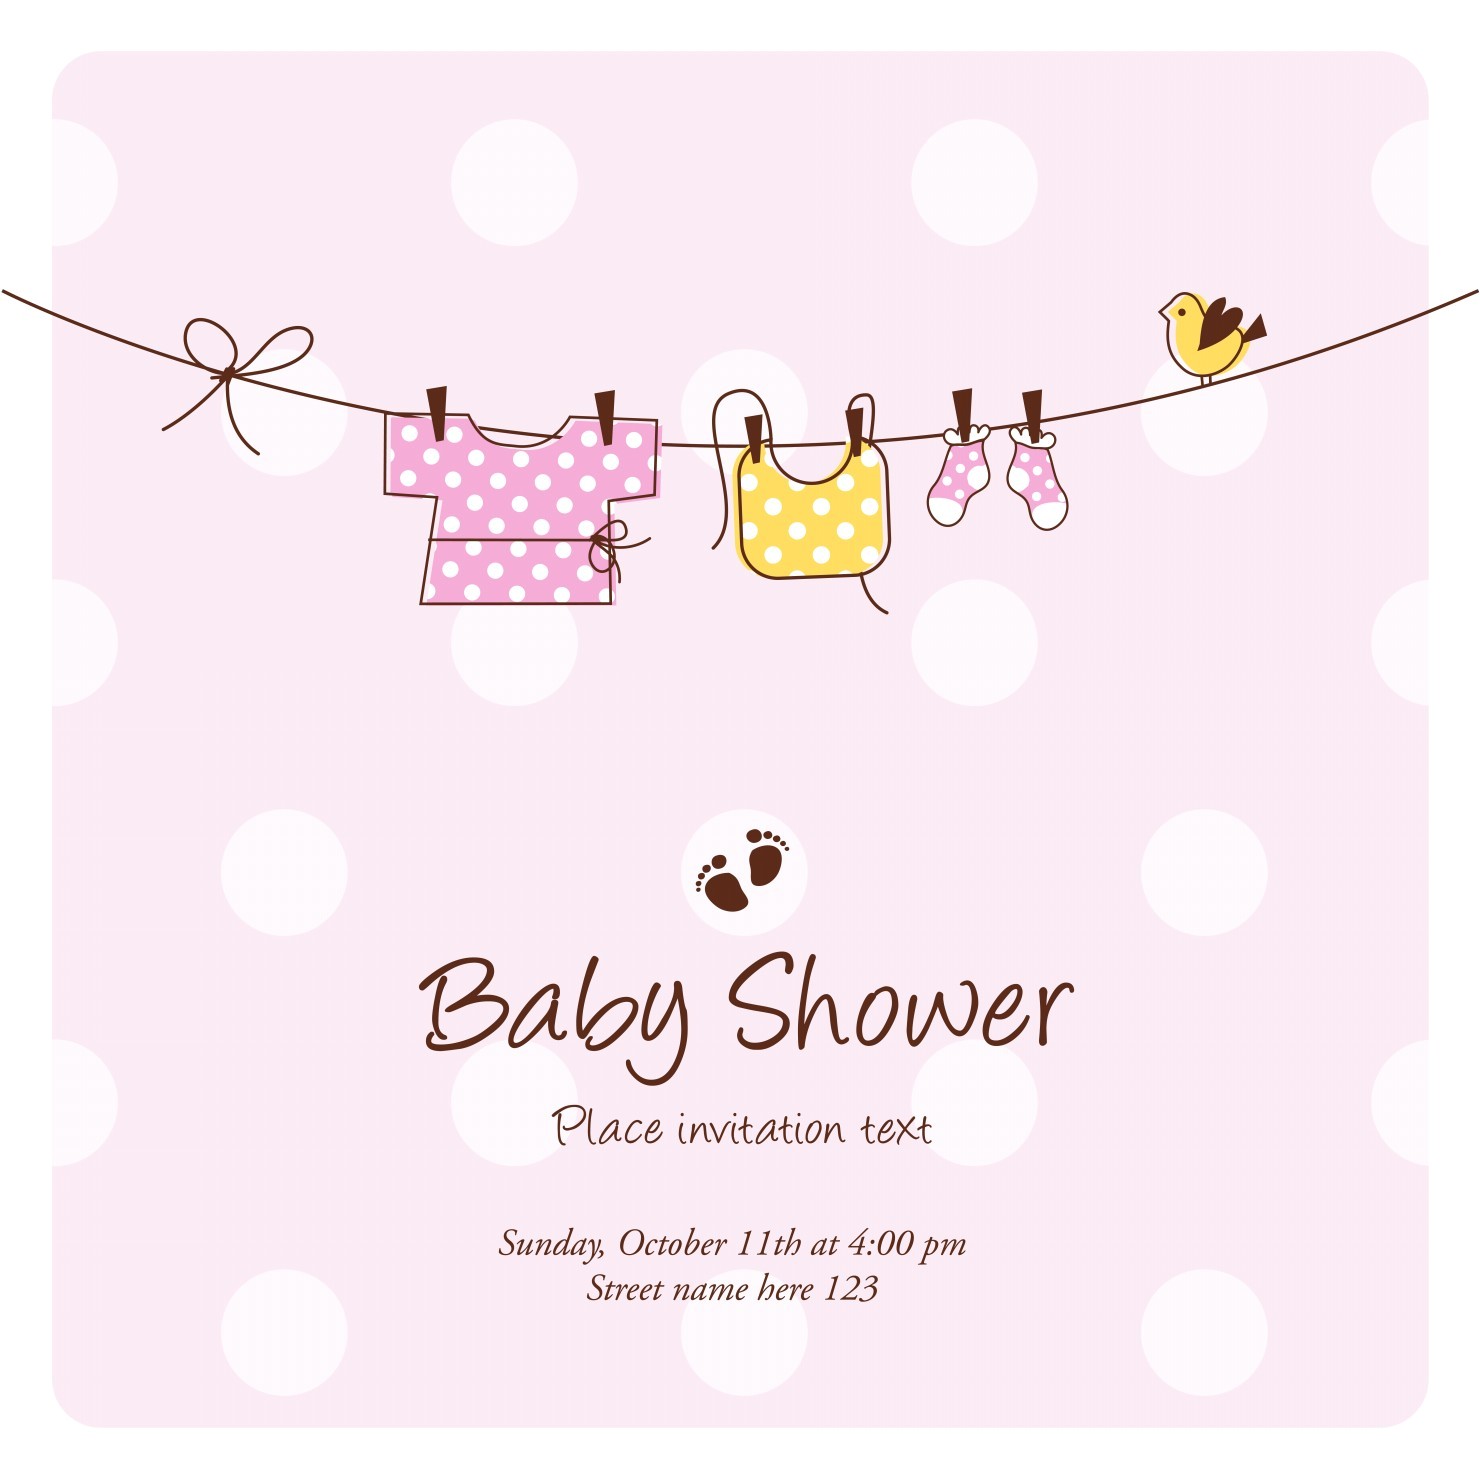 invitation cards for baby shower